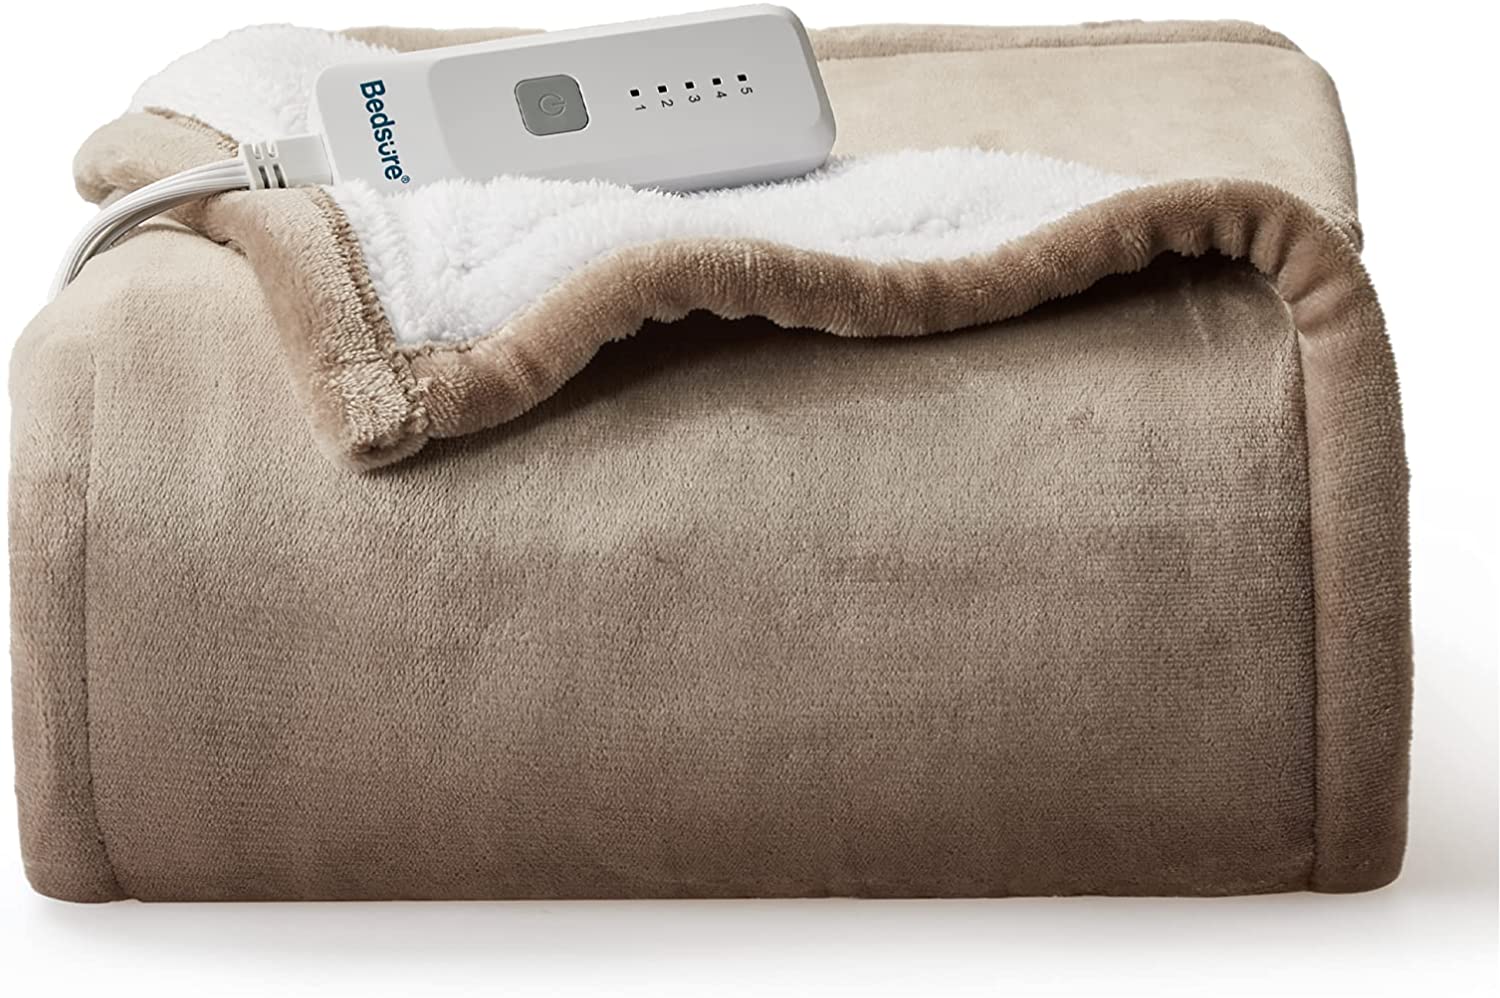 HOW TO CHOOSE ELECTRIC BLANKET